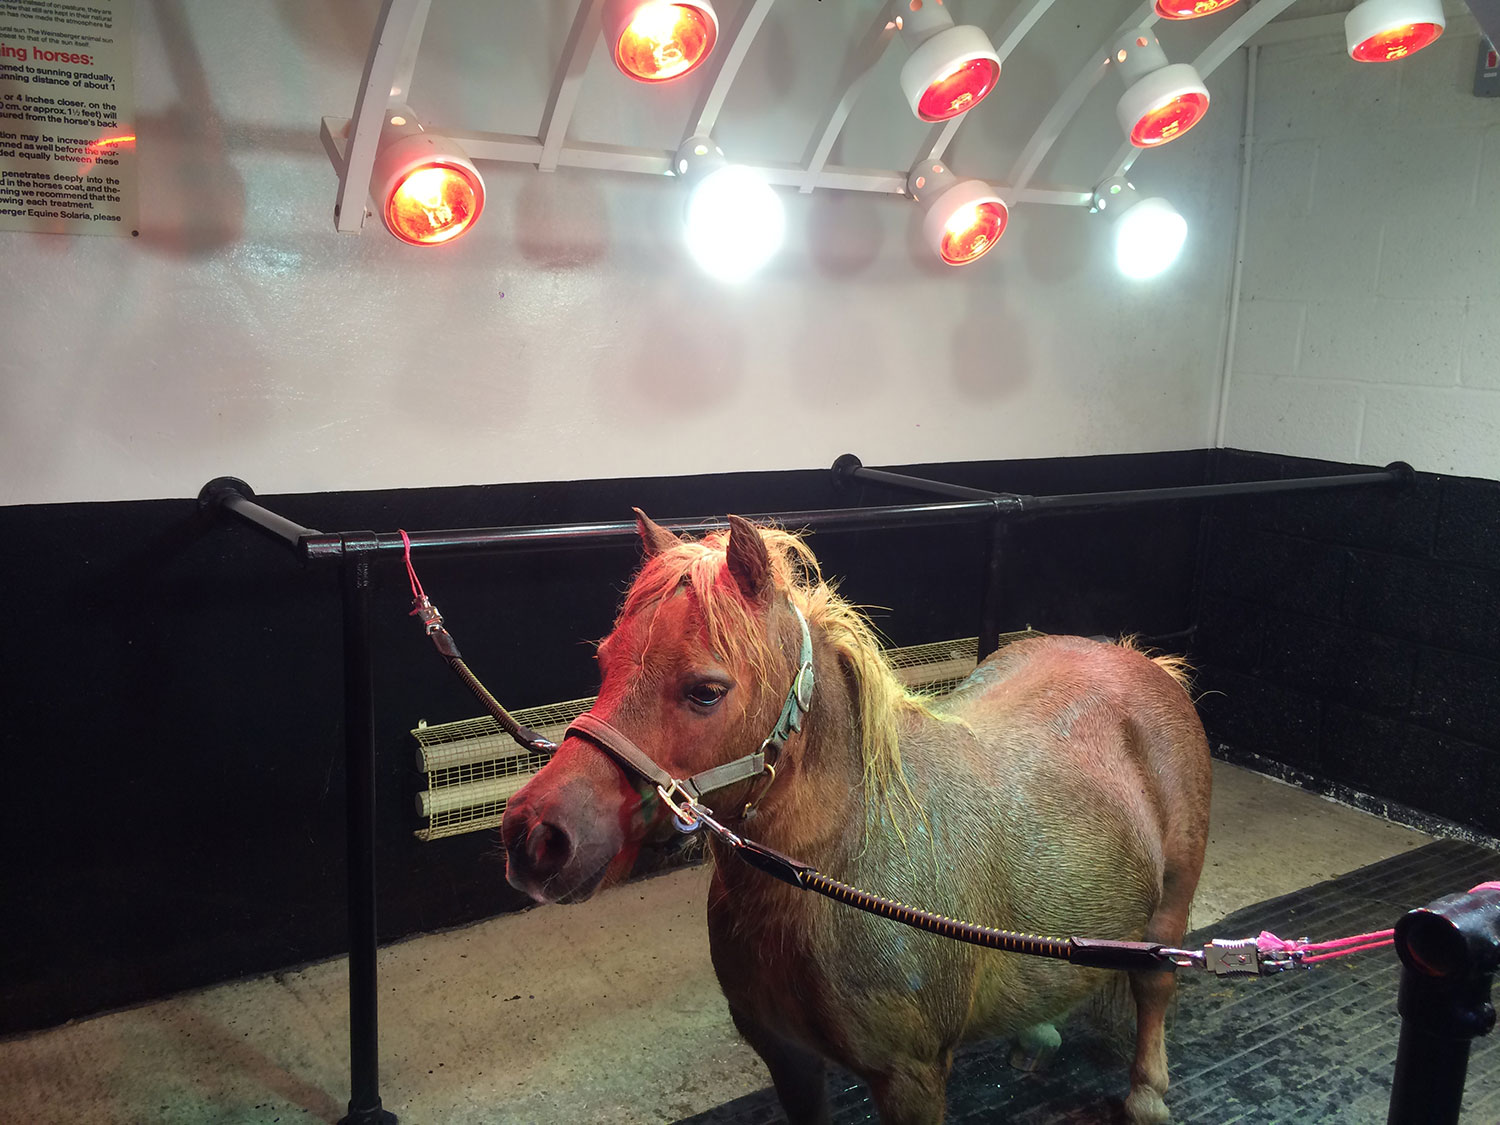 Weinsberger adjustable horse solarium with infa red and sun lamps